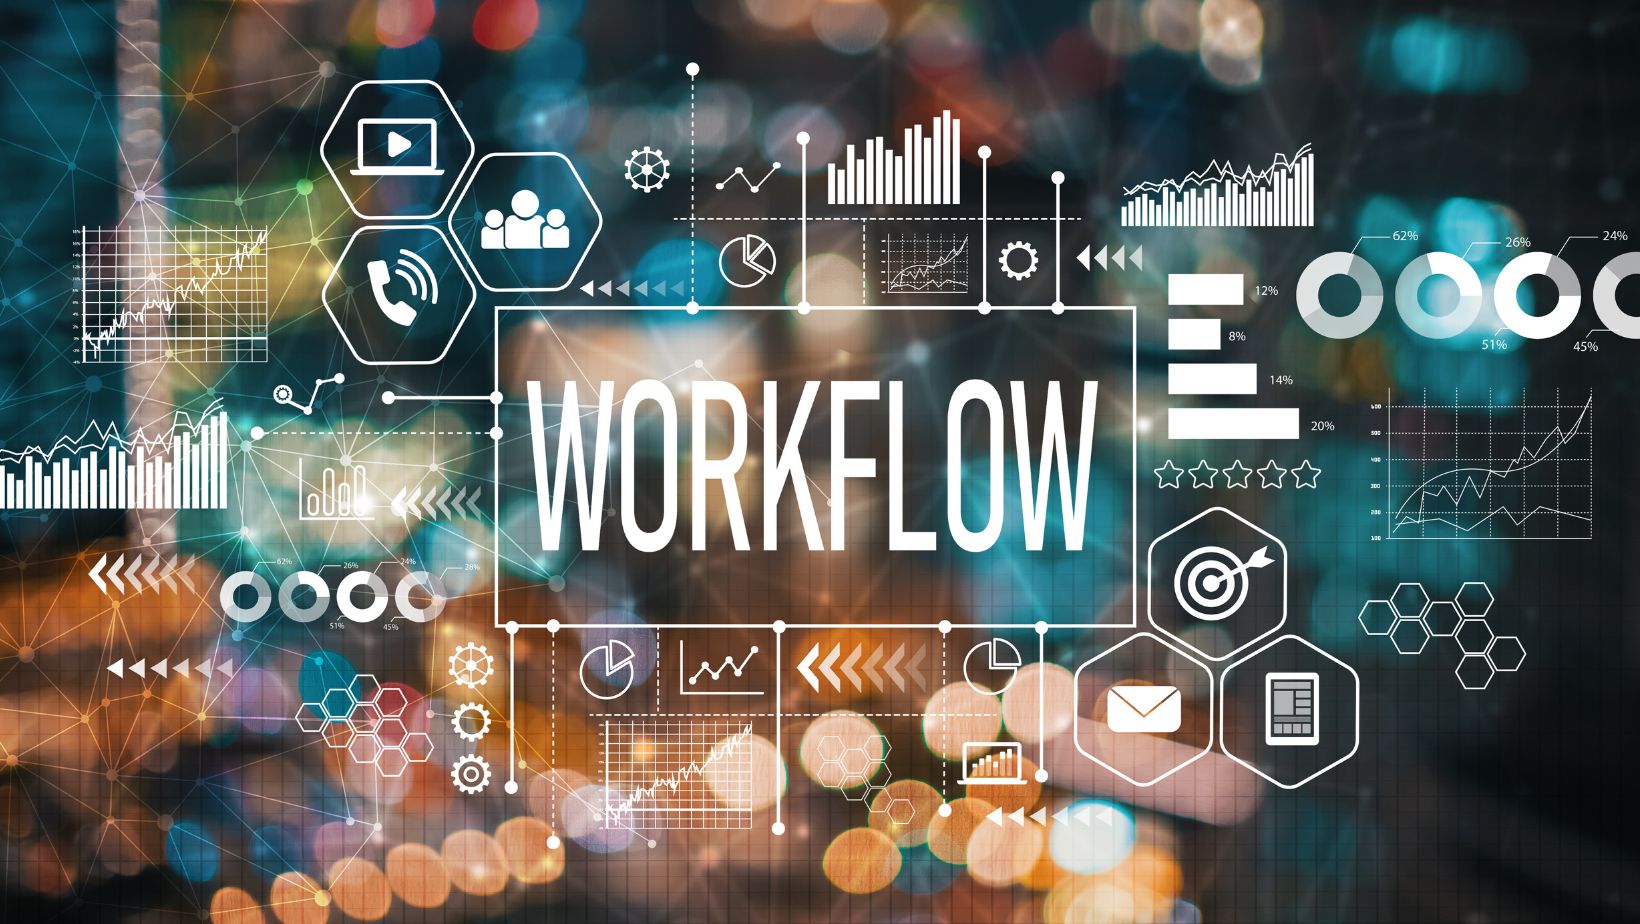 Document-Workflow-Management-Infographic-Image